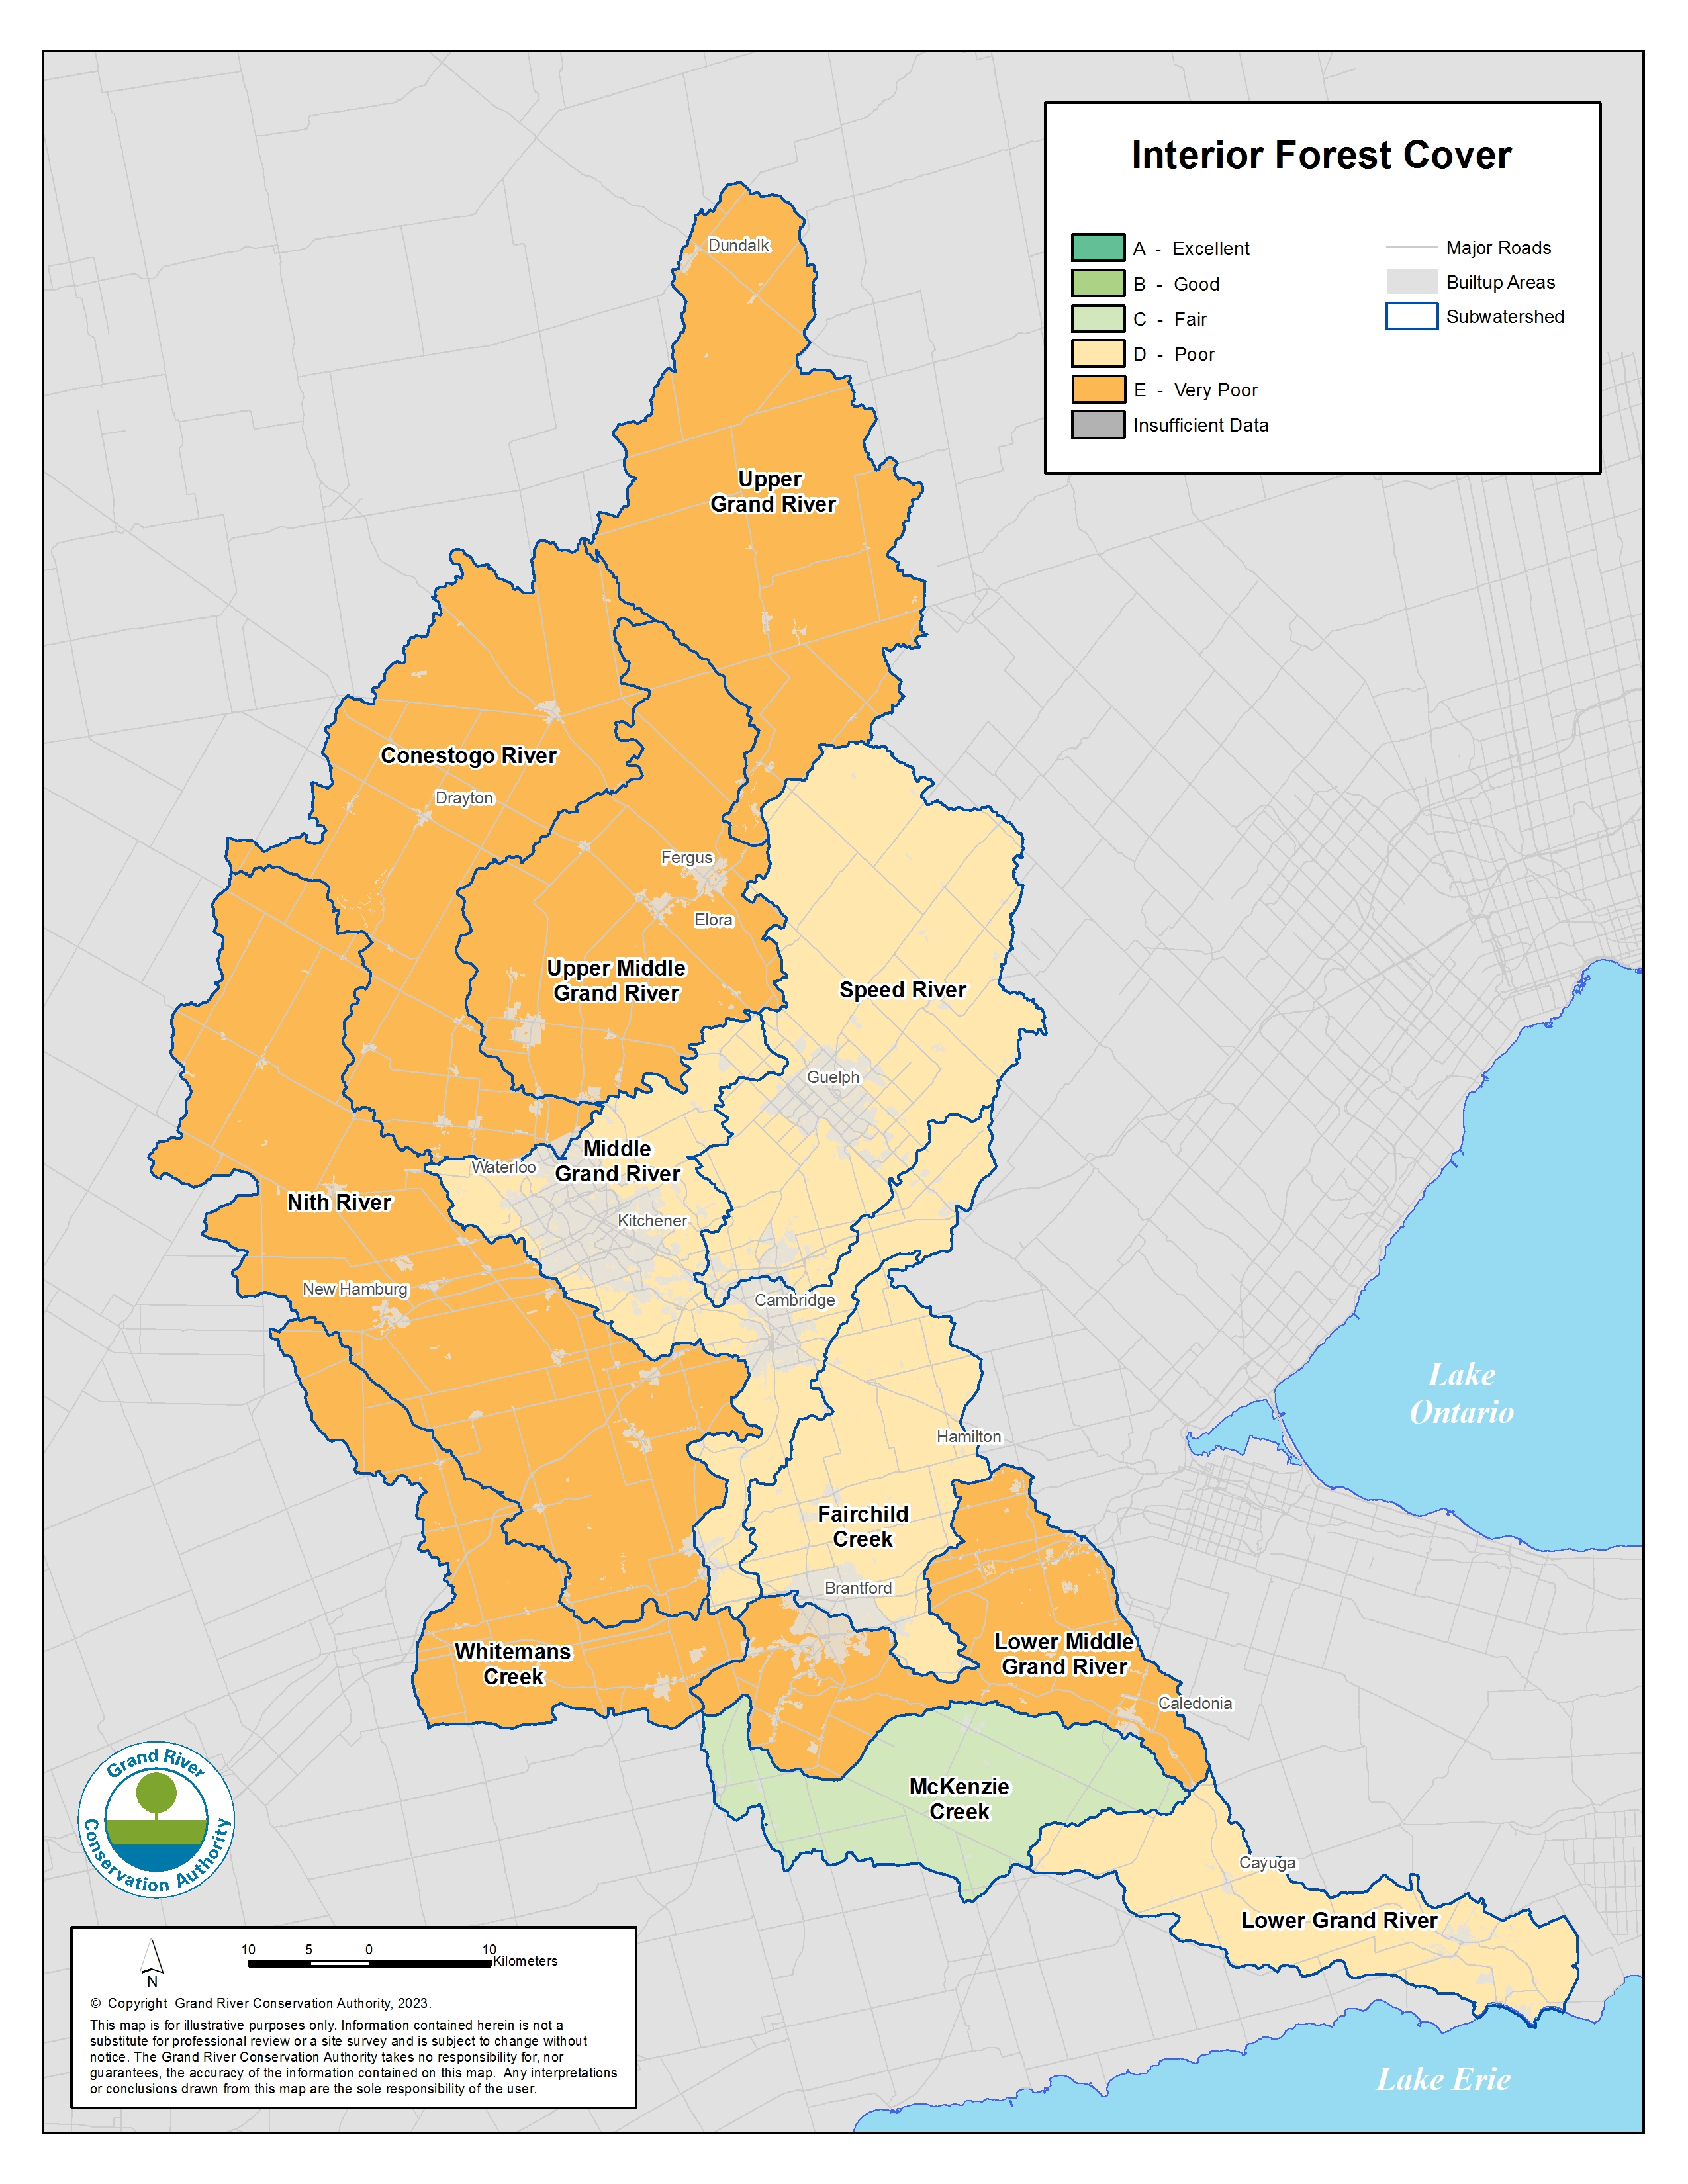 A map of letter grades for interior forest. The McKenzie Creek subwatershed has a C grade. The Fairchild Creek, Lower and Middle Grand River, and Speed River subwatersheds have D grades. All other areas have an F grade. 